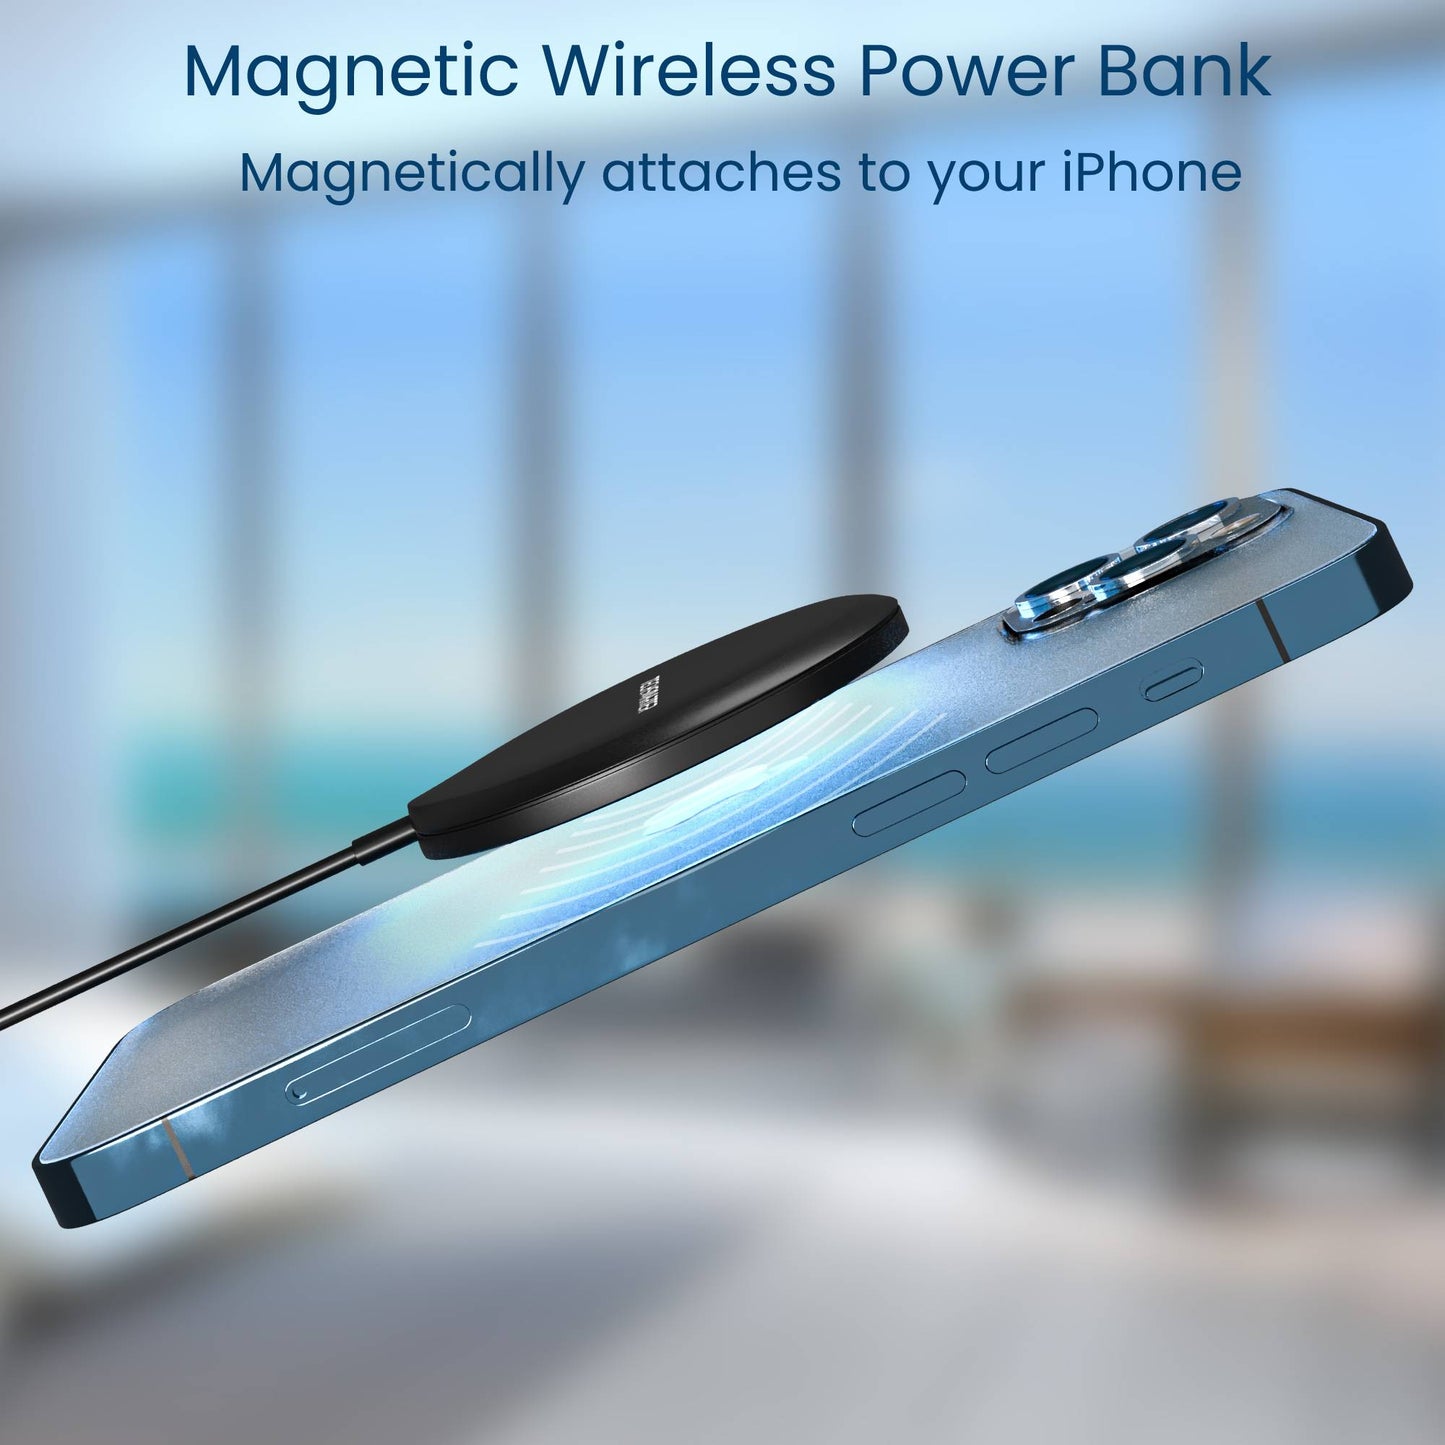 MagBoost Magnetic Wireless Charger with Wall Charger - TechsmarterTechsmarter